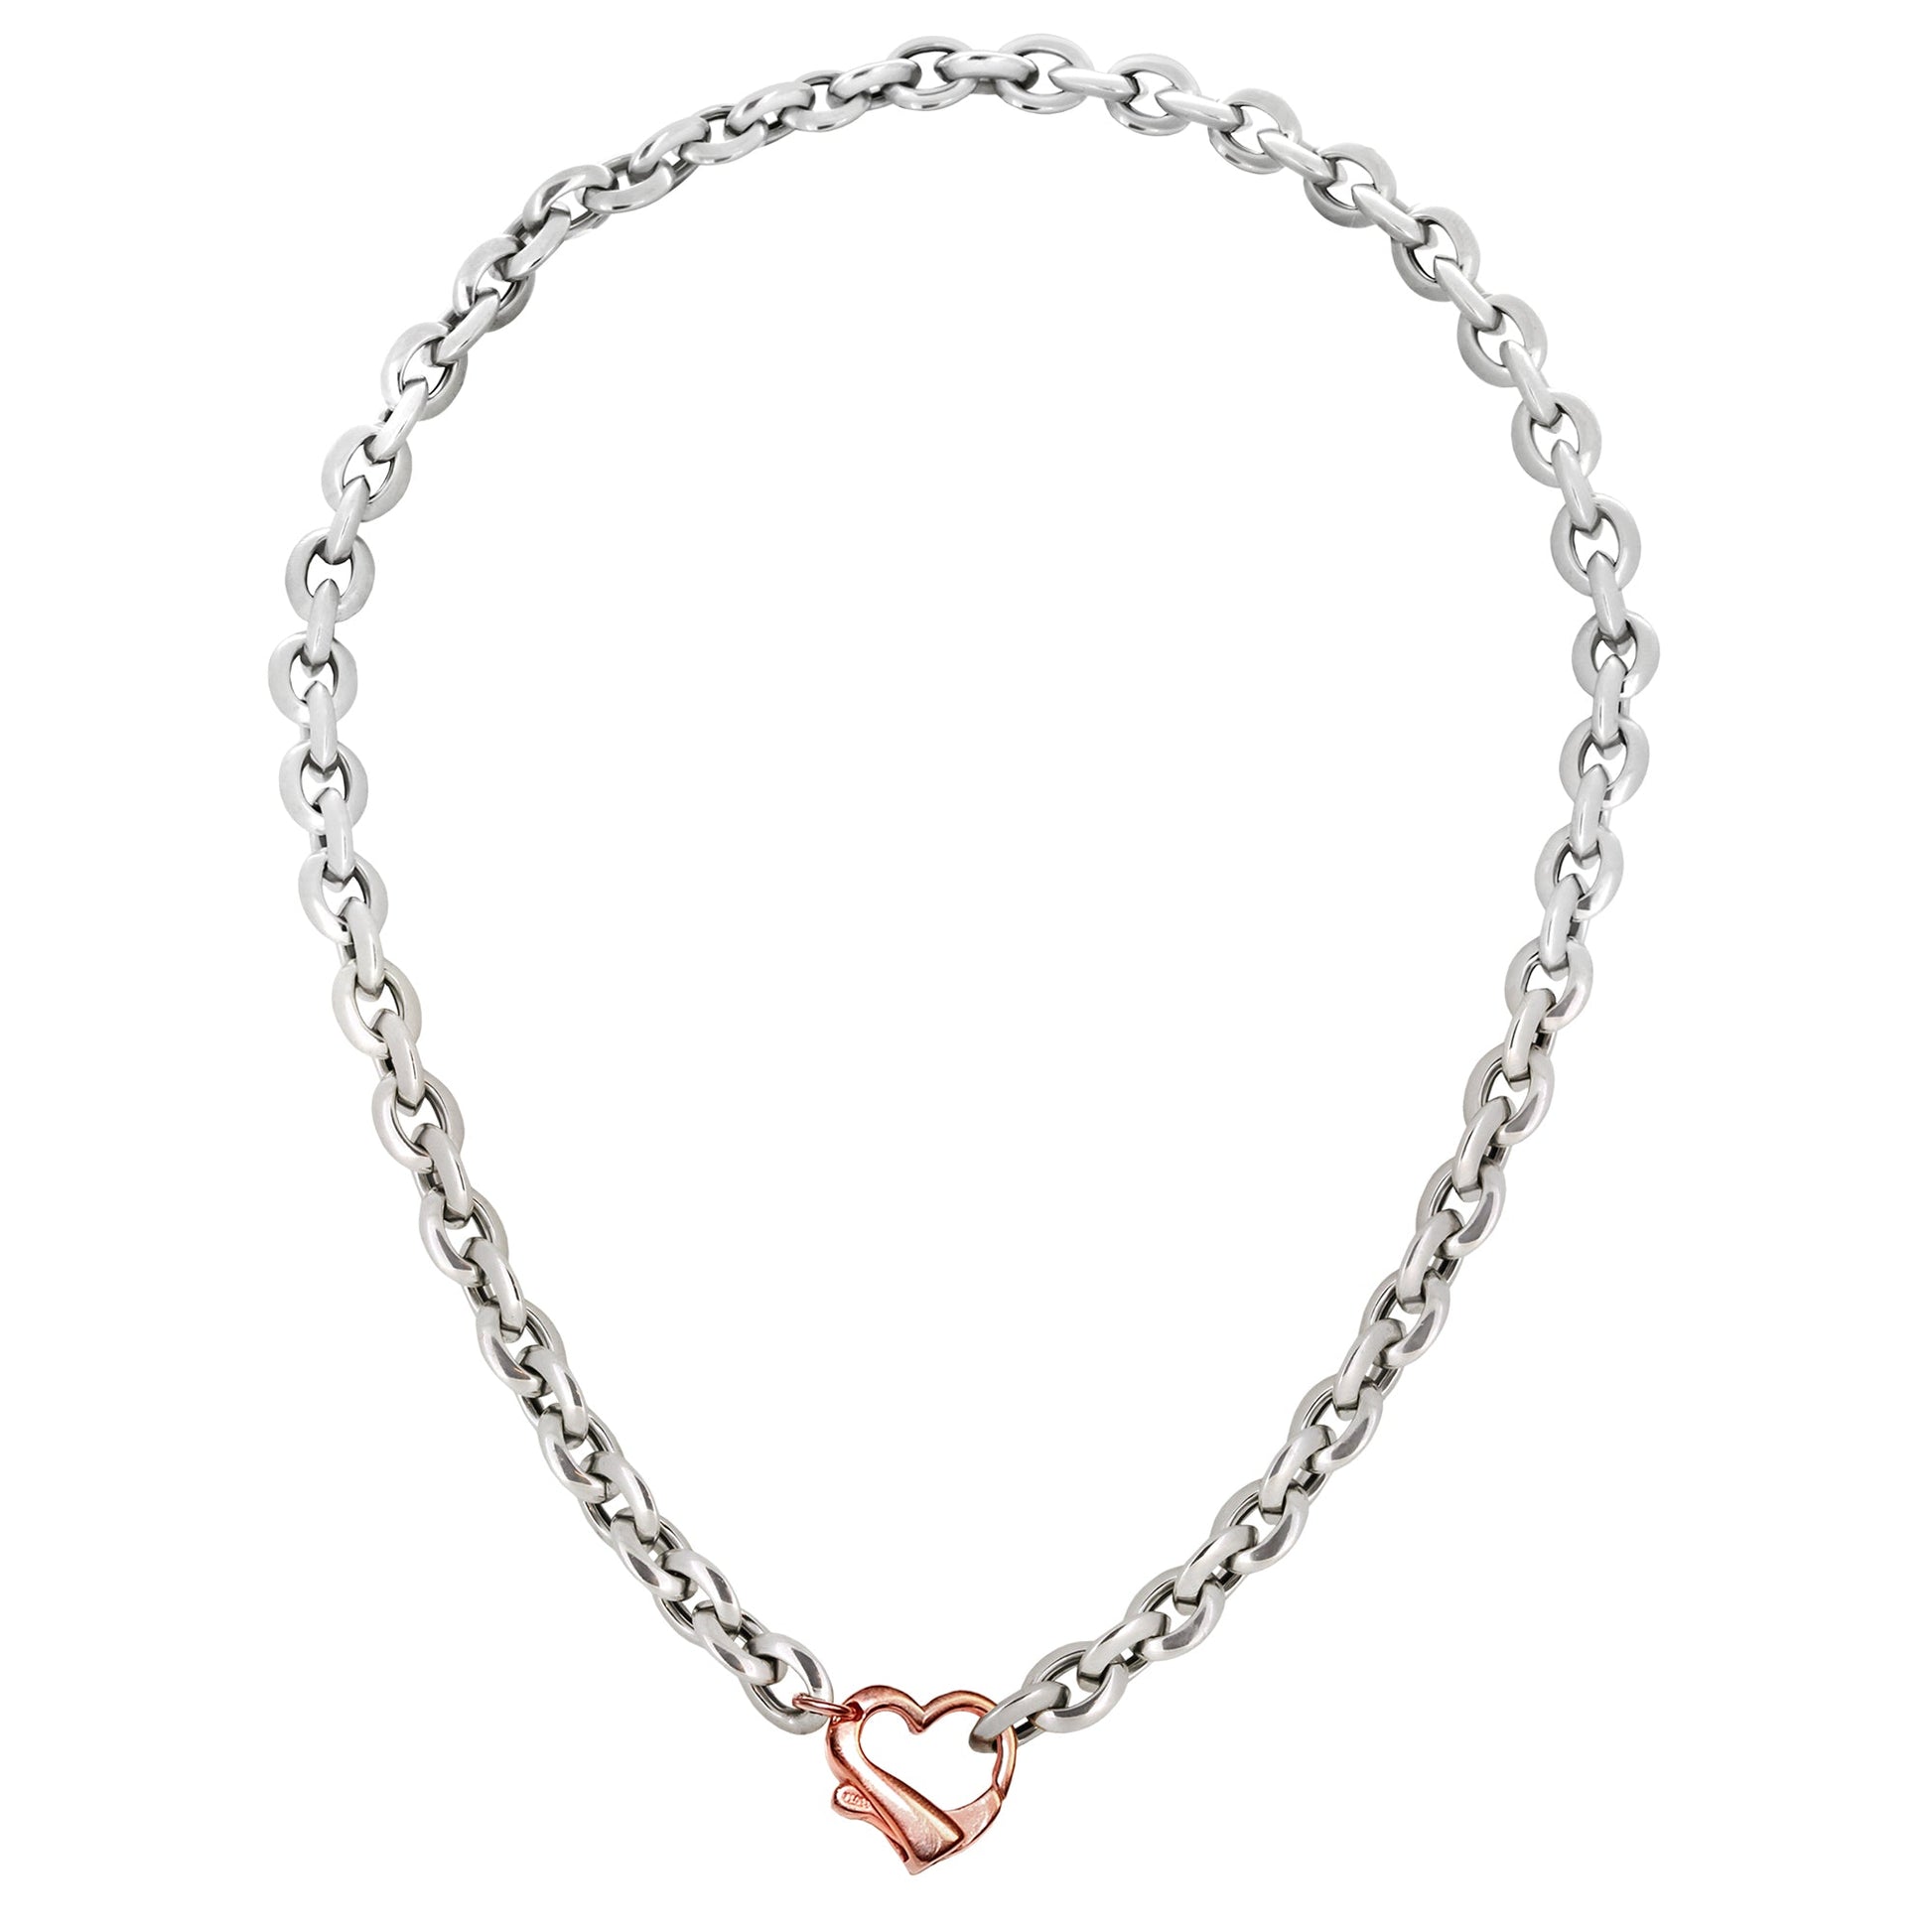 Franco Stellari Italian Sterling Silver Rose Gold Heart Clasp Link Necklace, 17"